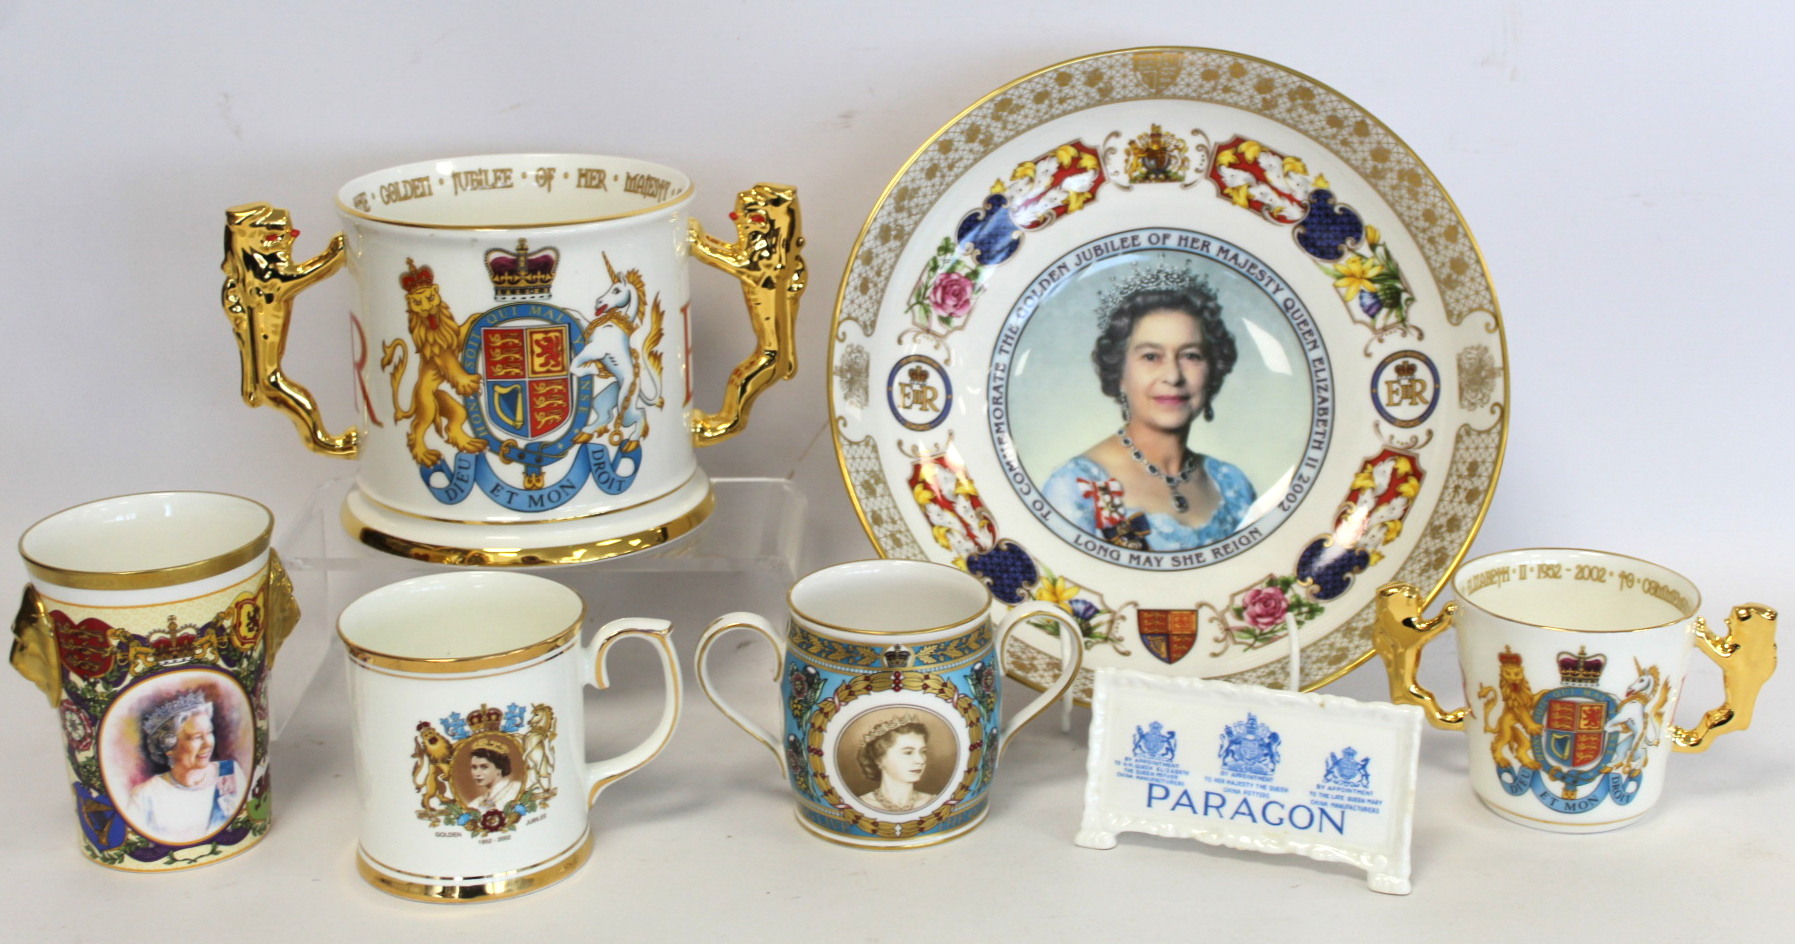 Large Paragon commemorative bone china loving cup for the Golden Jubilee 2002, limited edition no.